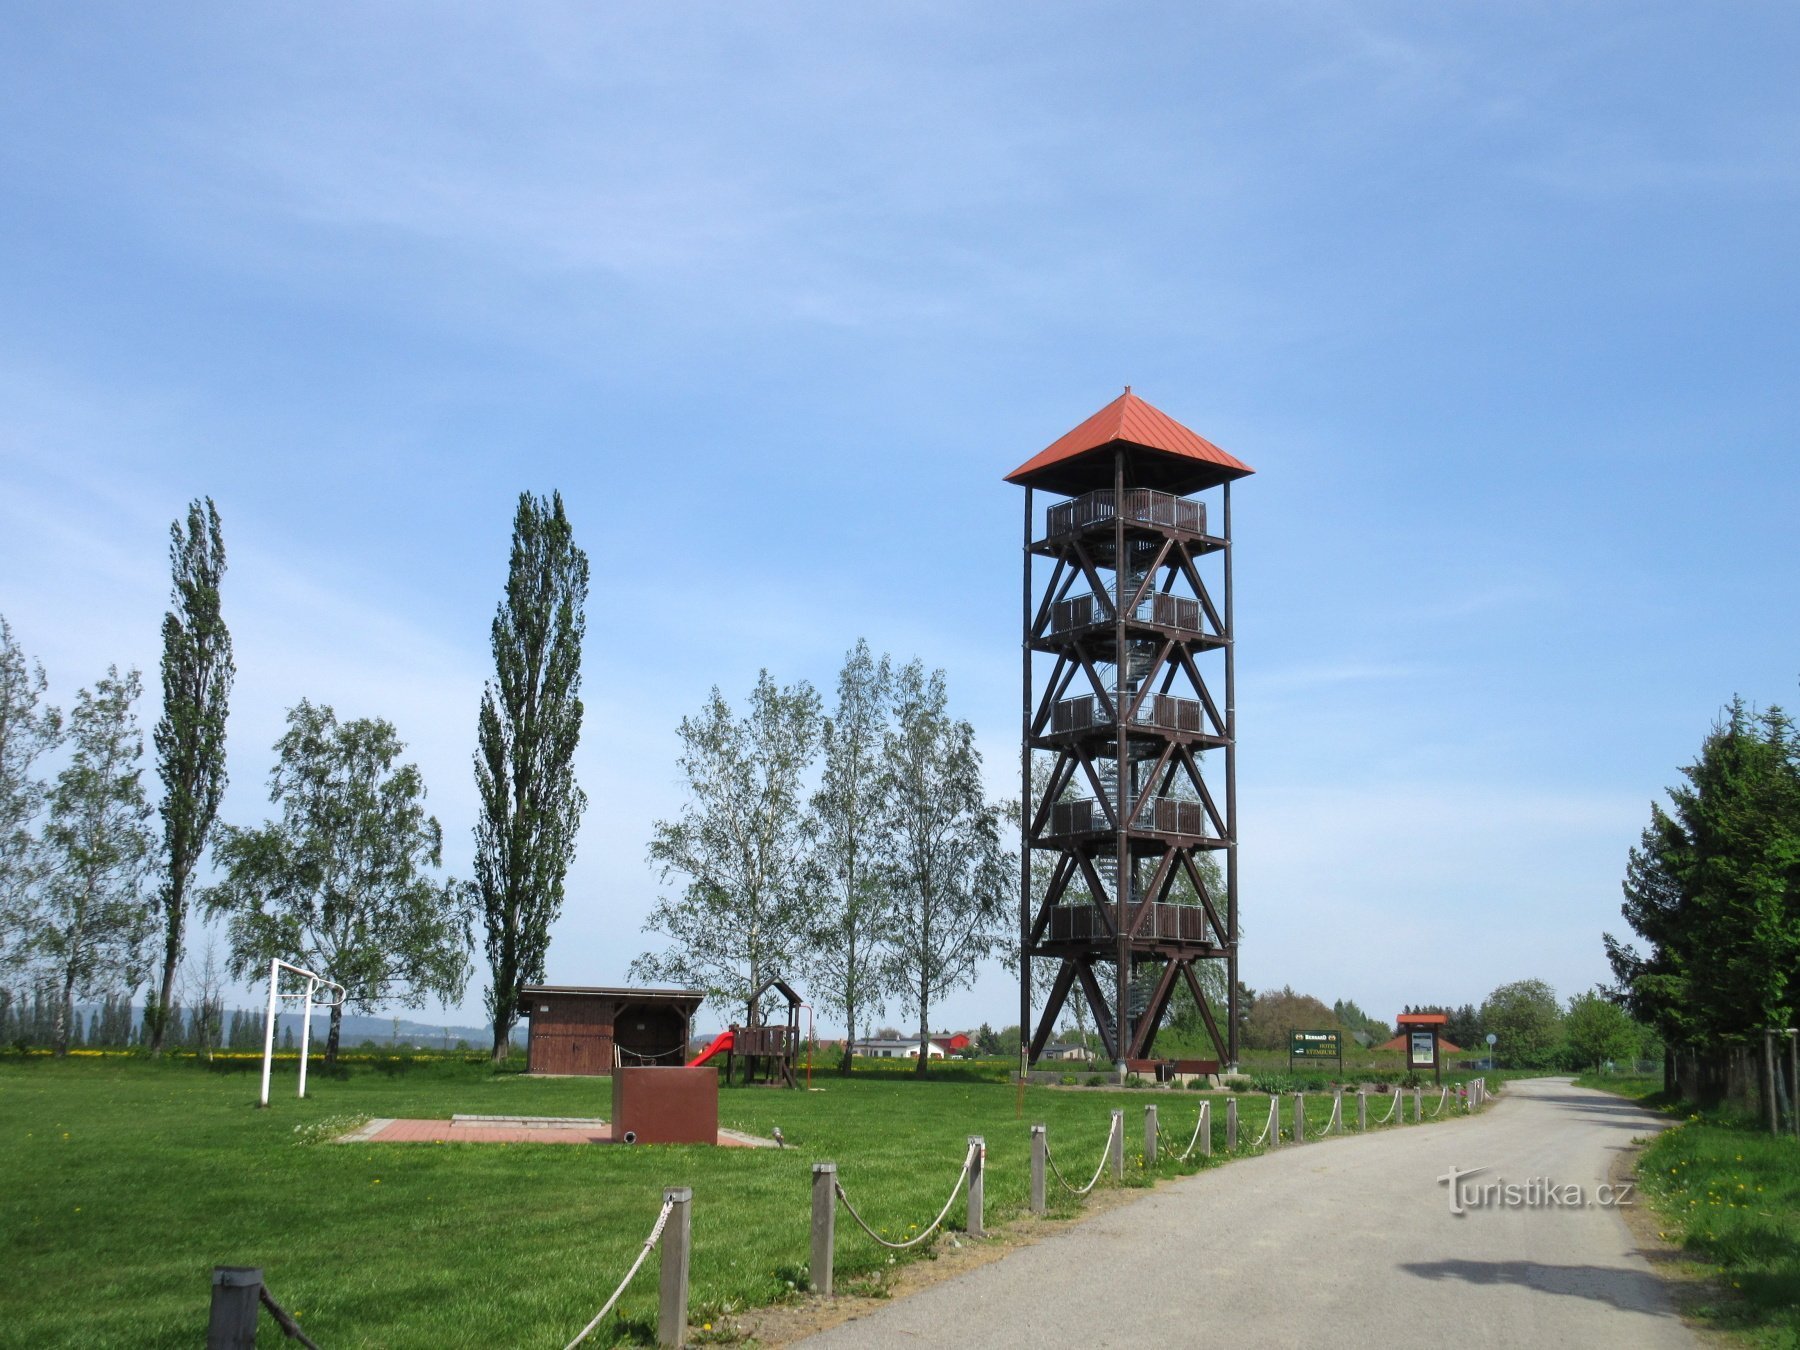 Žernov – village and lookout tower